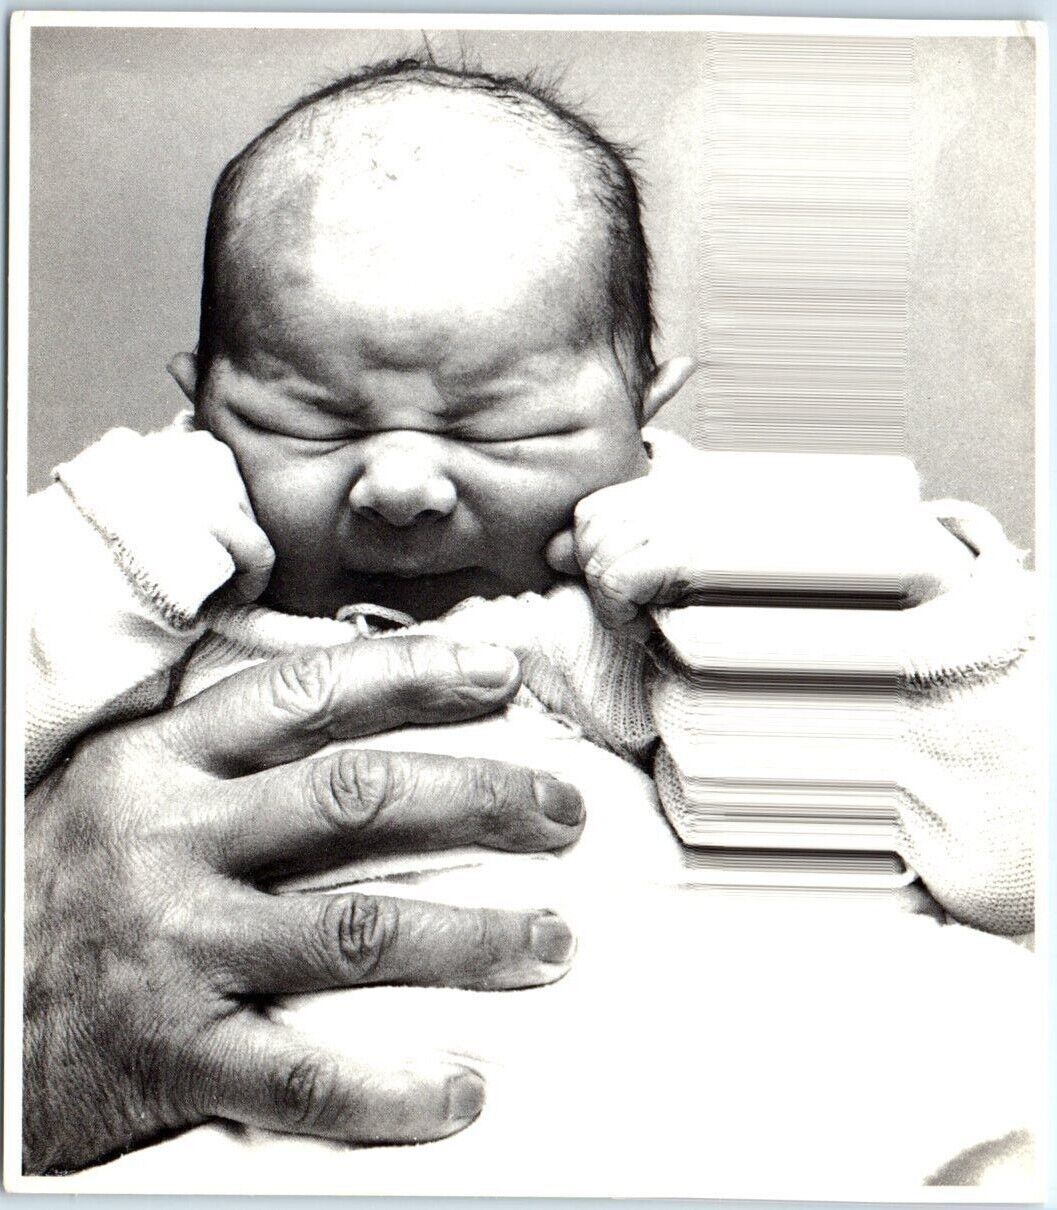 Postcard - Picture of a Baby